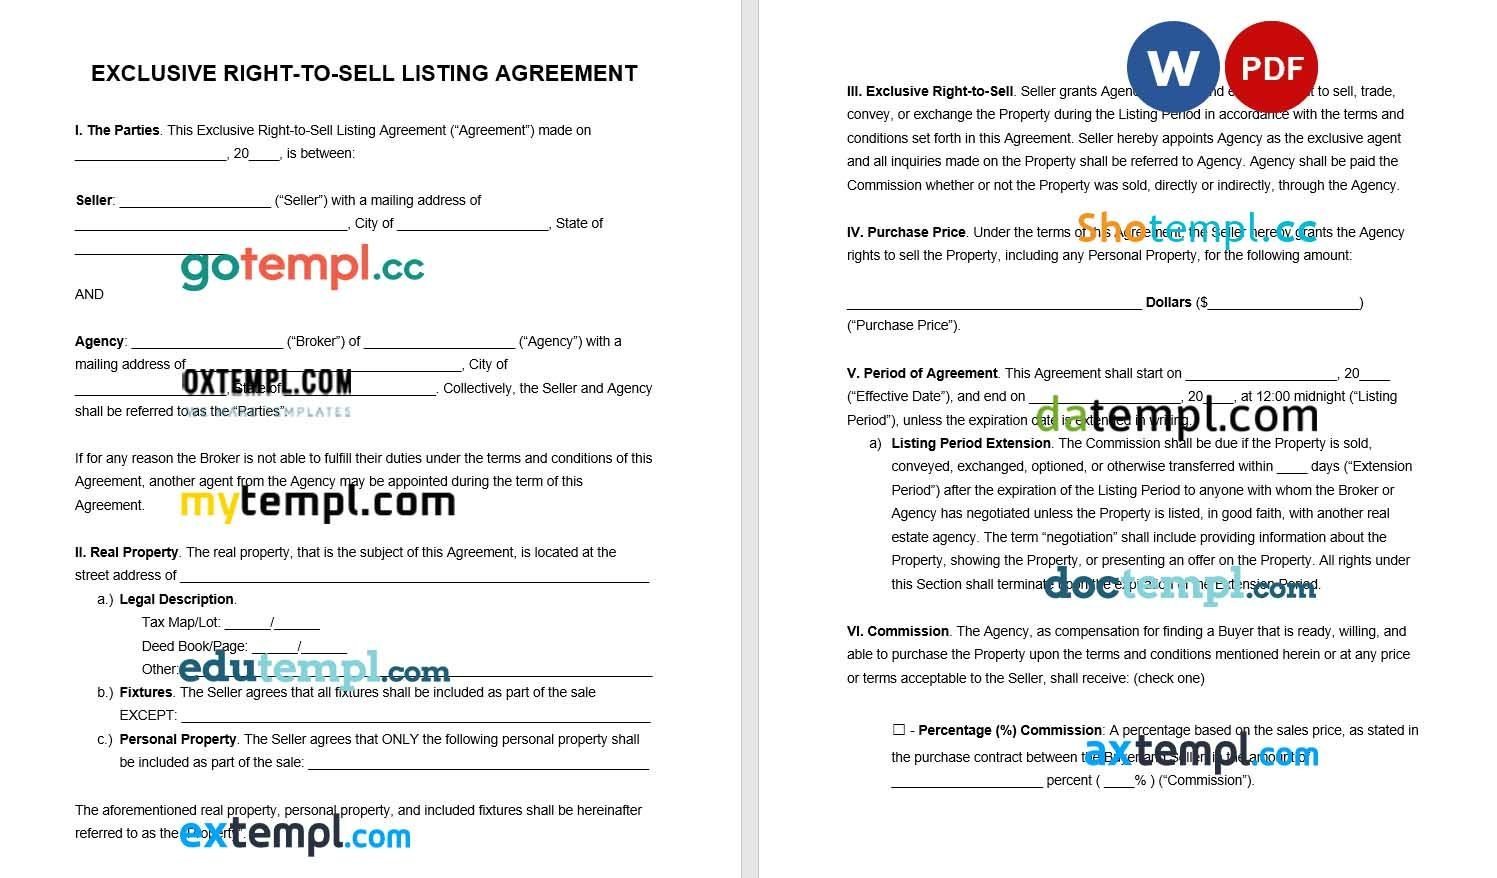 Exclusive Right to Sell Listing Agreement Word example, fully editable